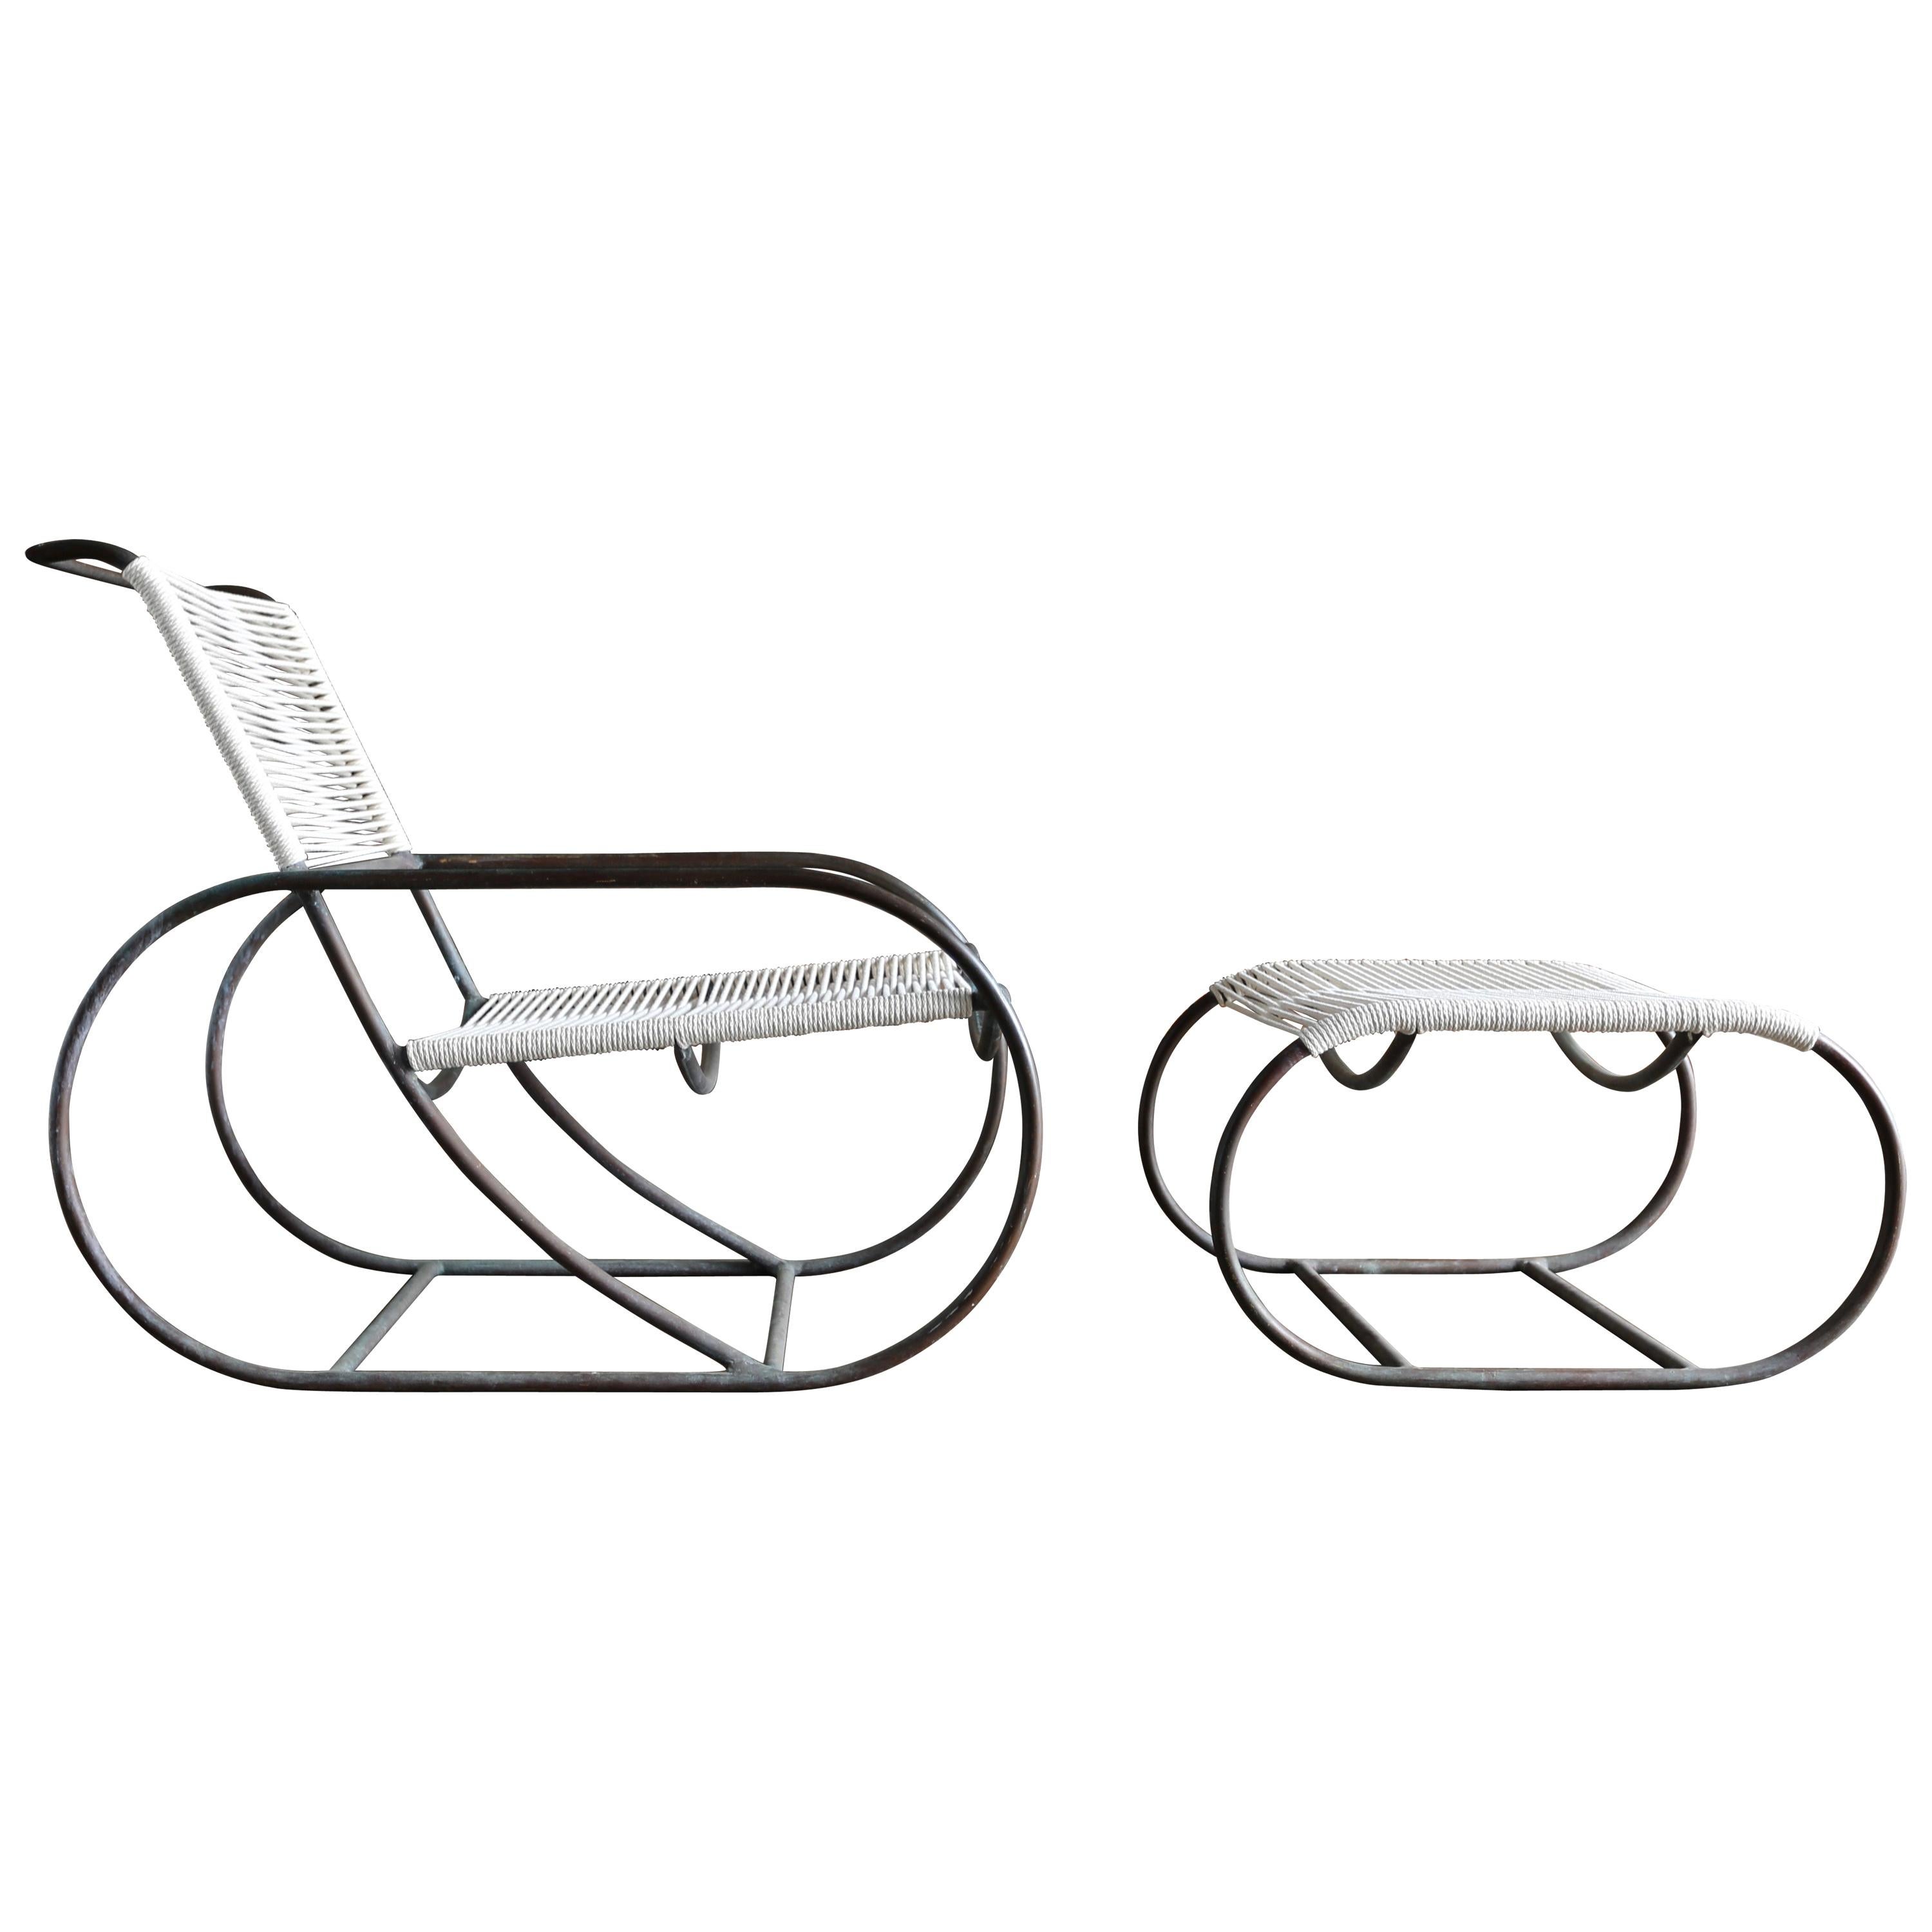  Bronze Outdoor Lounge Chair and Ottoman by Kipp Stewart for Terra of California